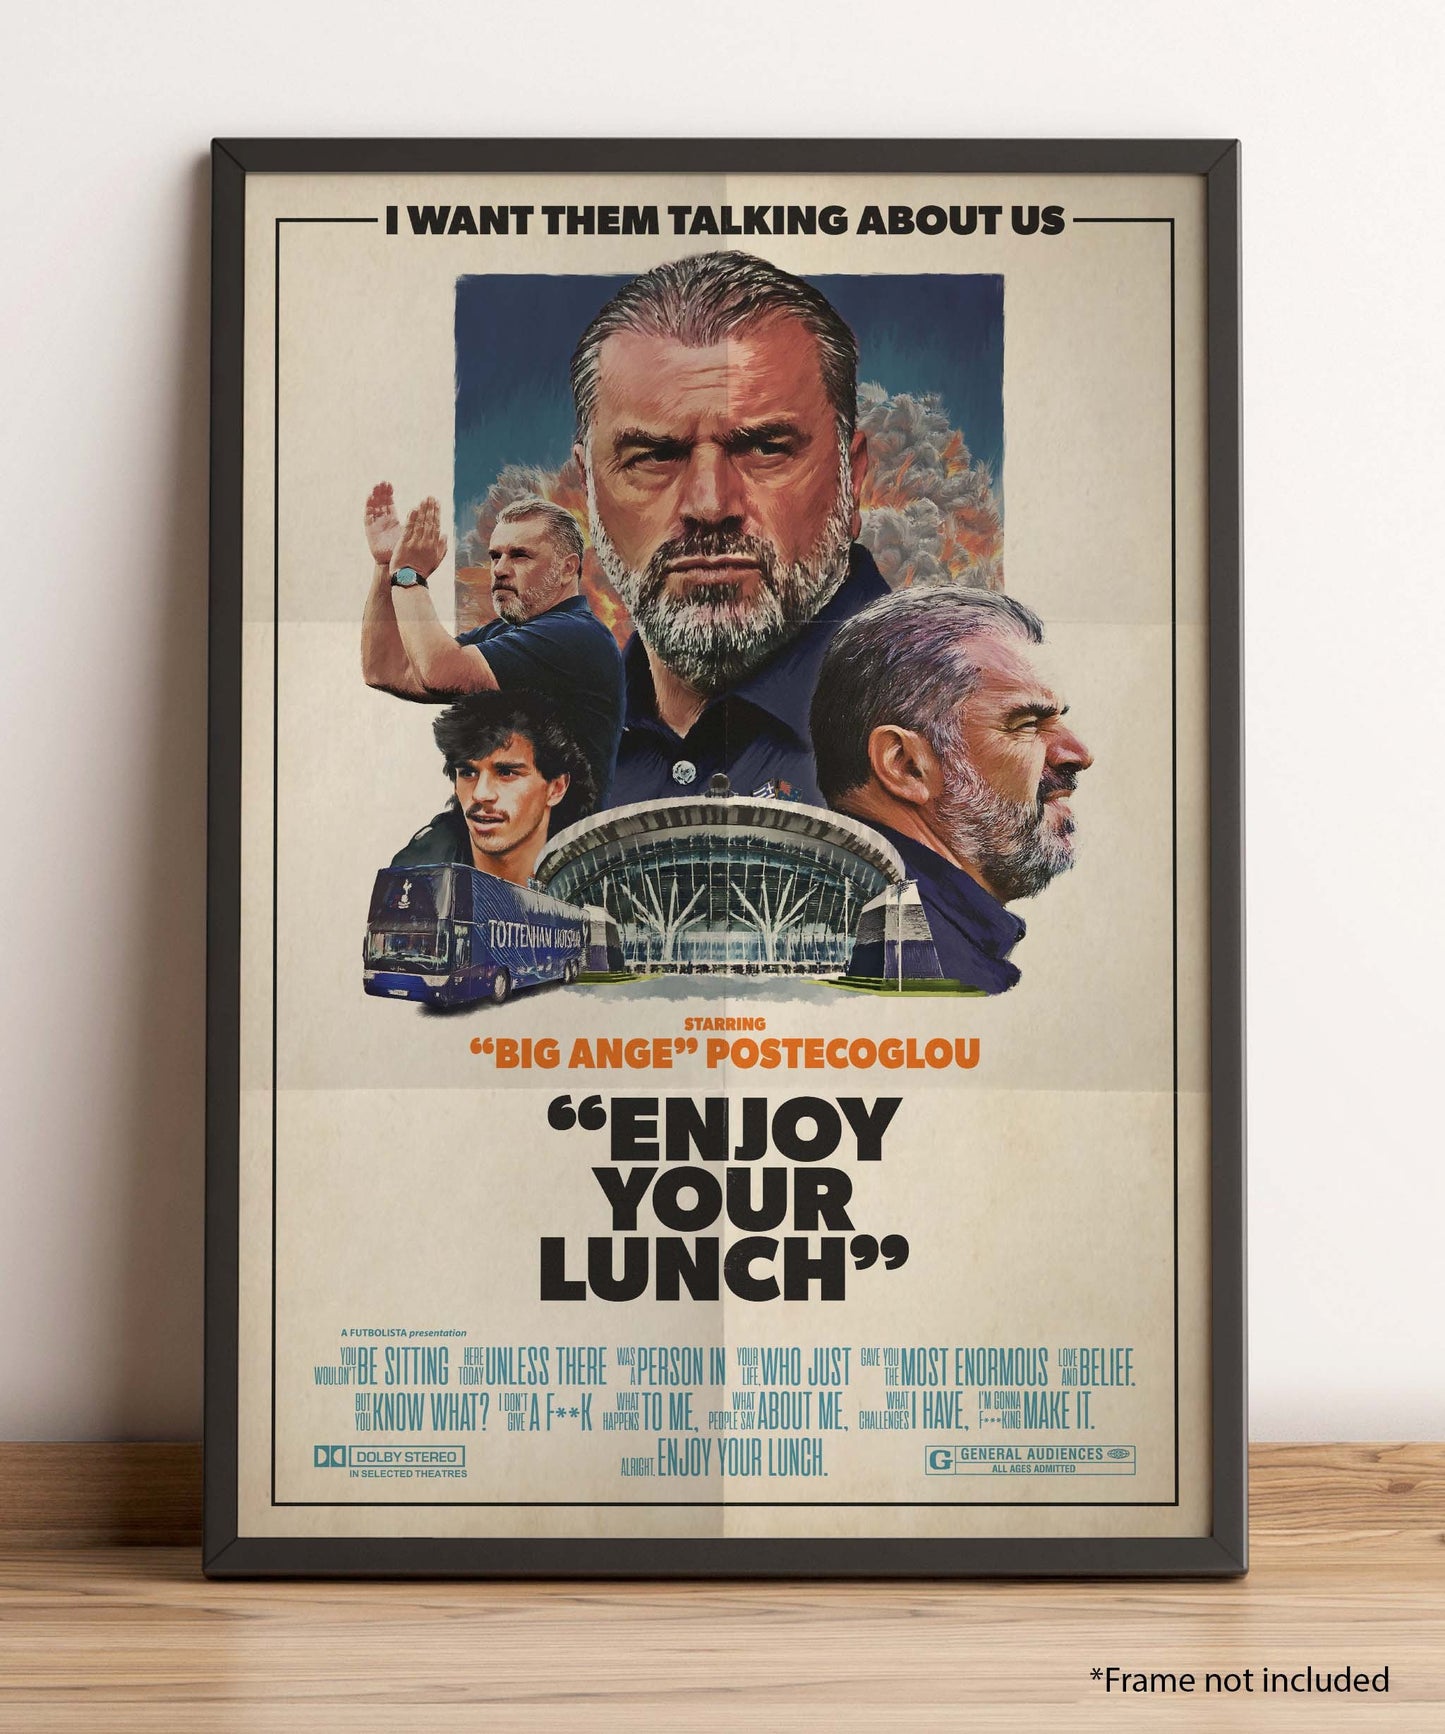 “ENJOY YOUR LUNCH” - Vintage Movie Poster